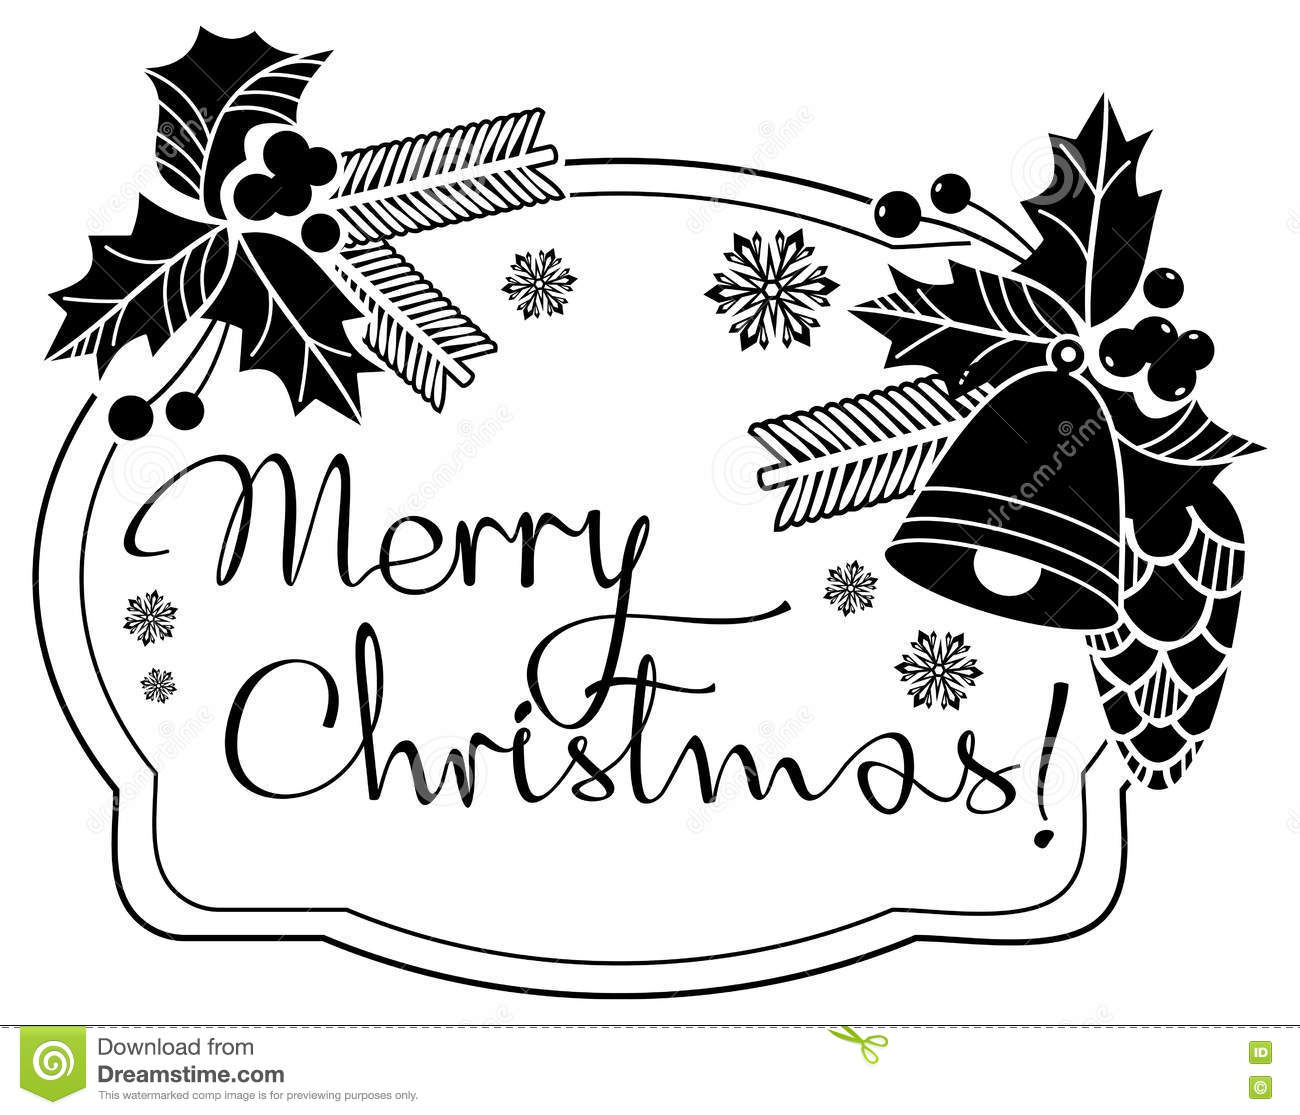 Christmas Label With Written Greeting `Merry Christmas.